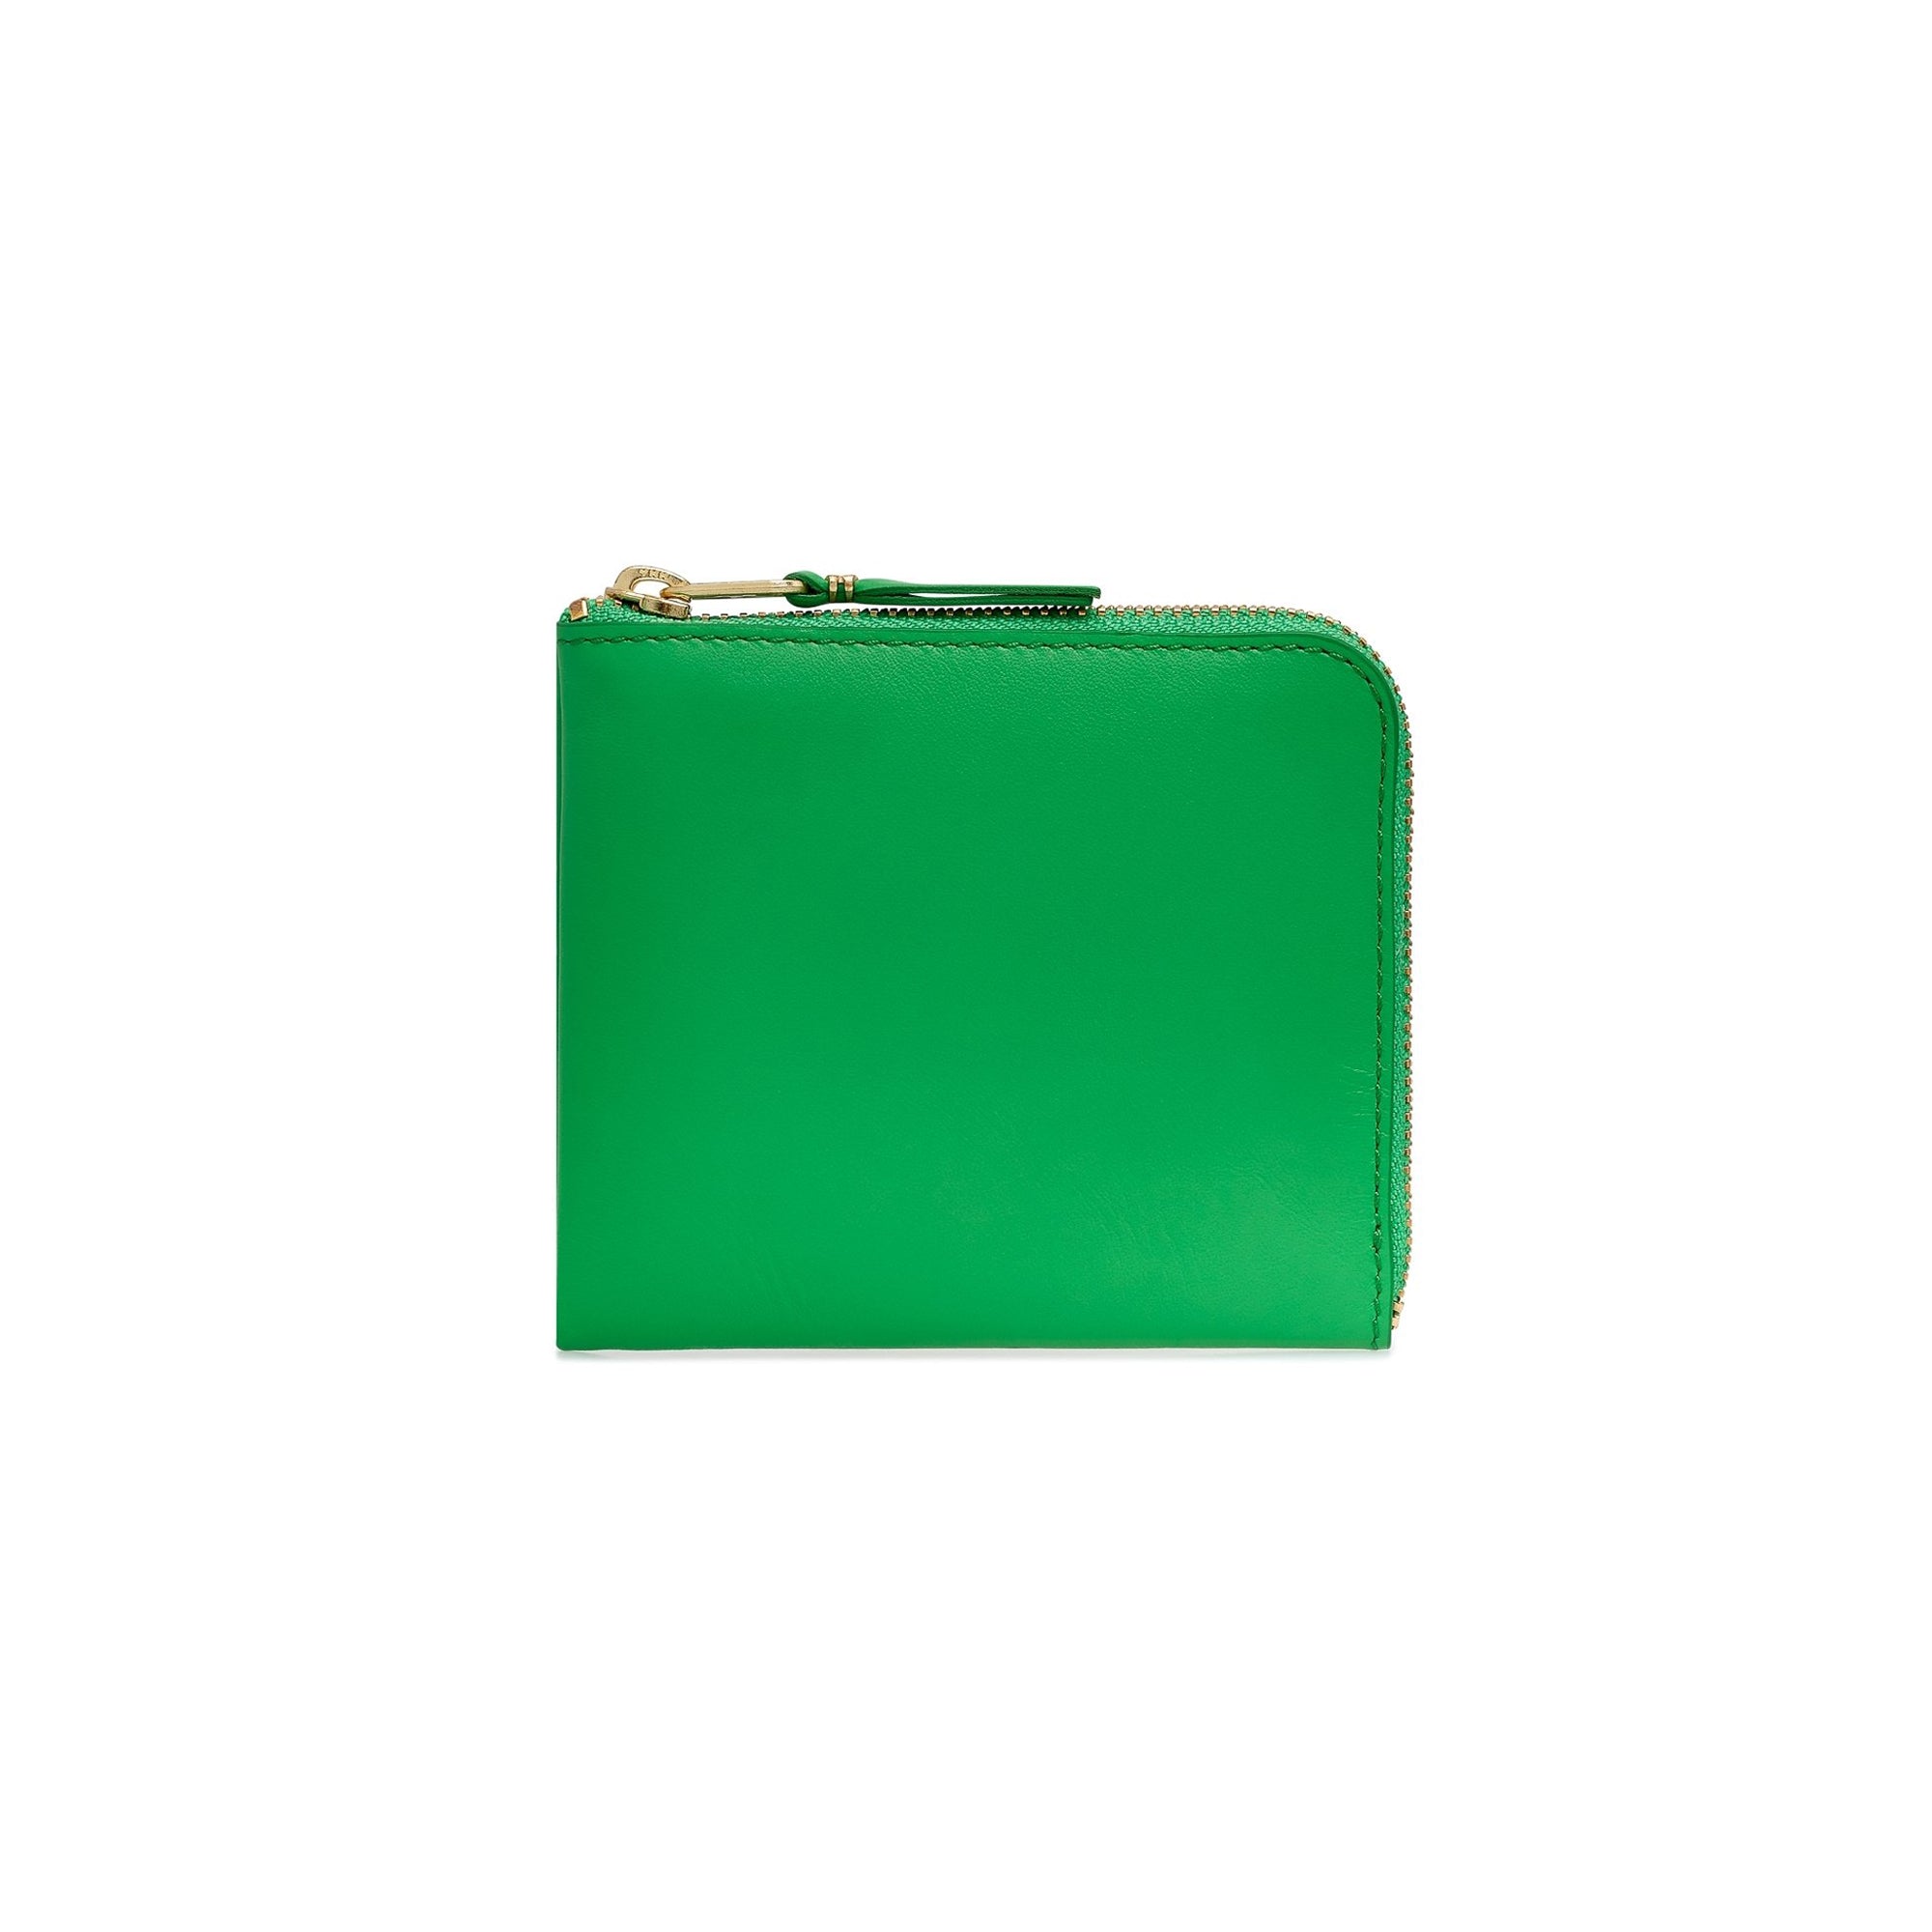 CDG WALLET - Colored Leather - (SA3100 Green) view 1